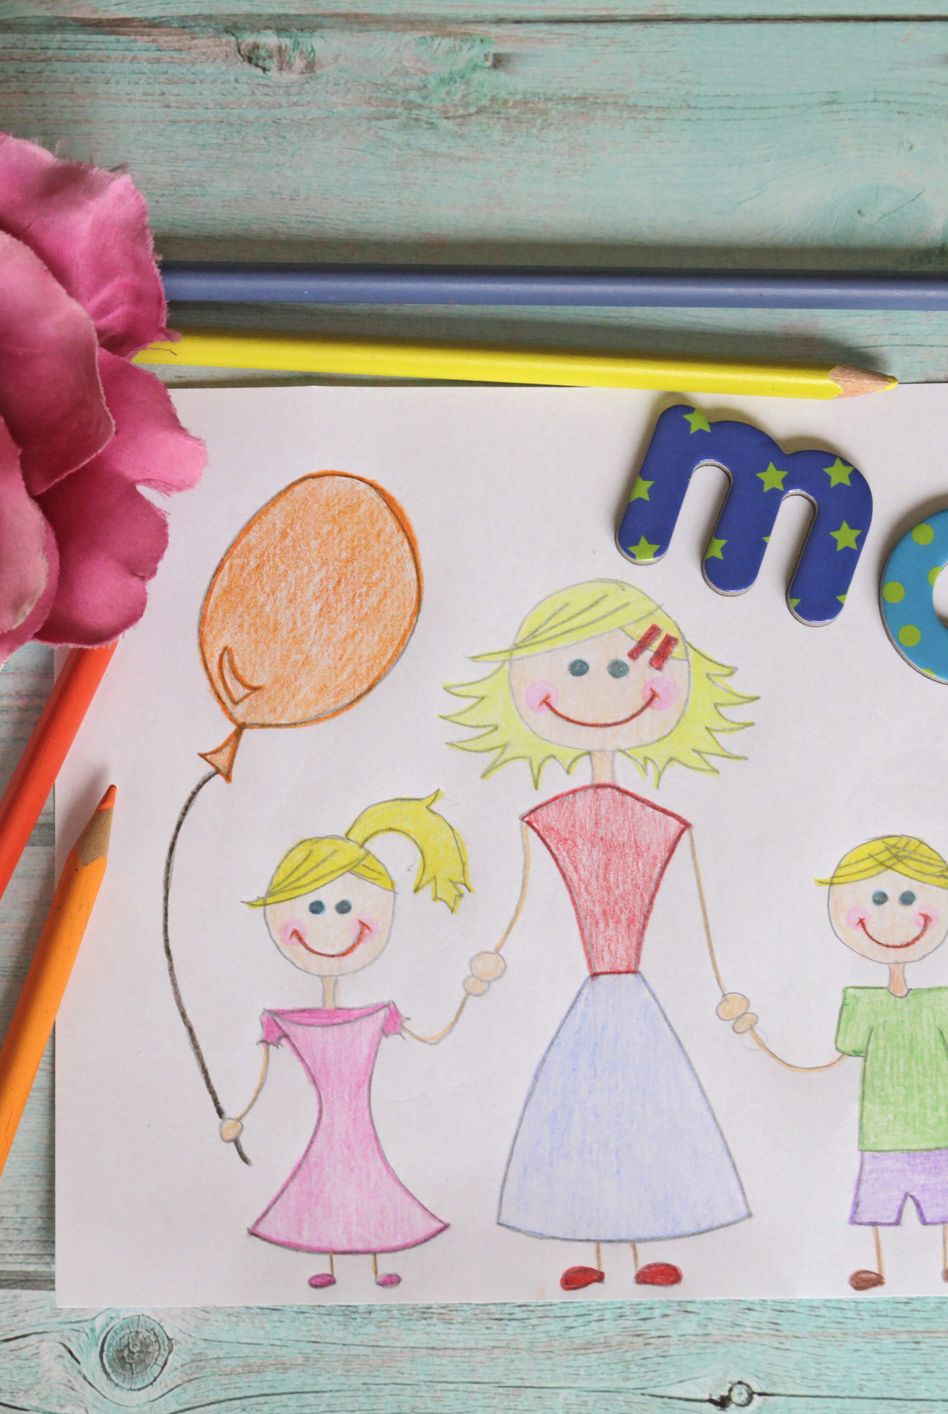 draw a picture for mother's day